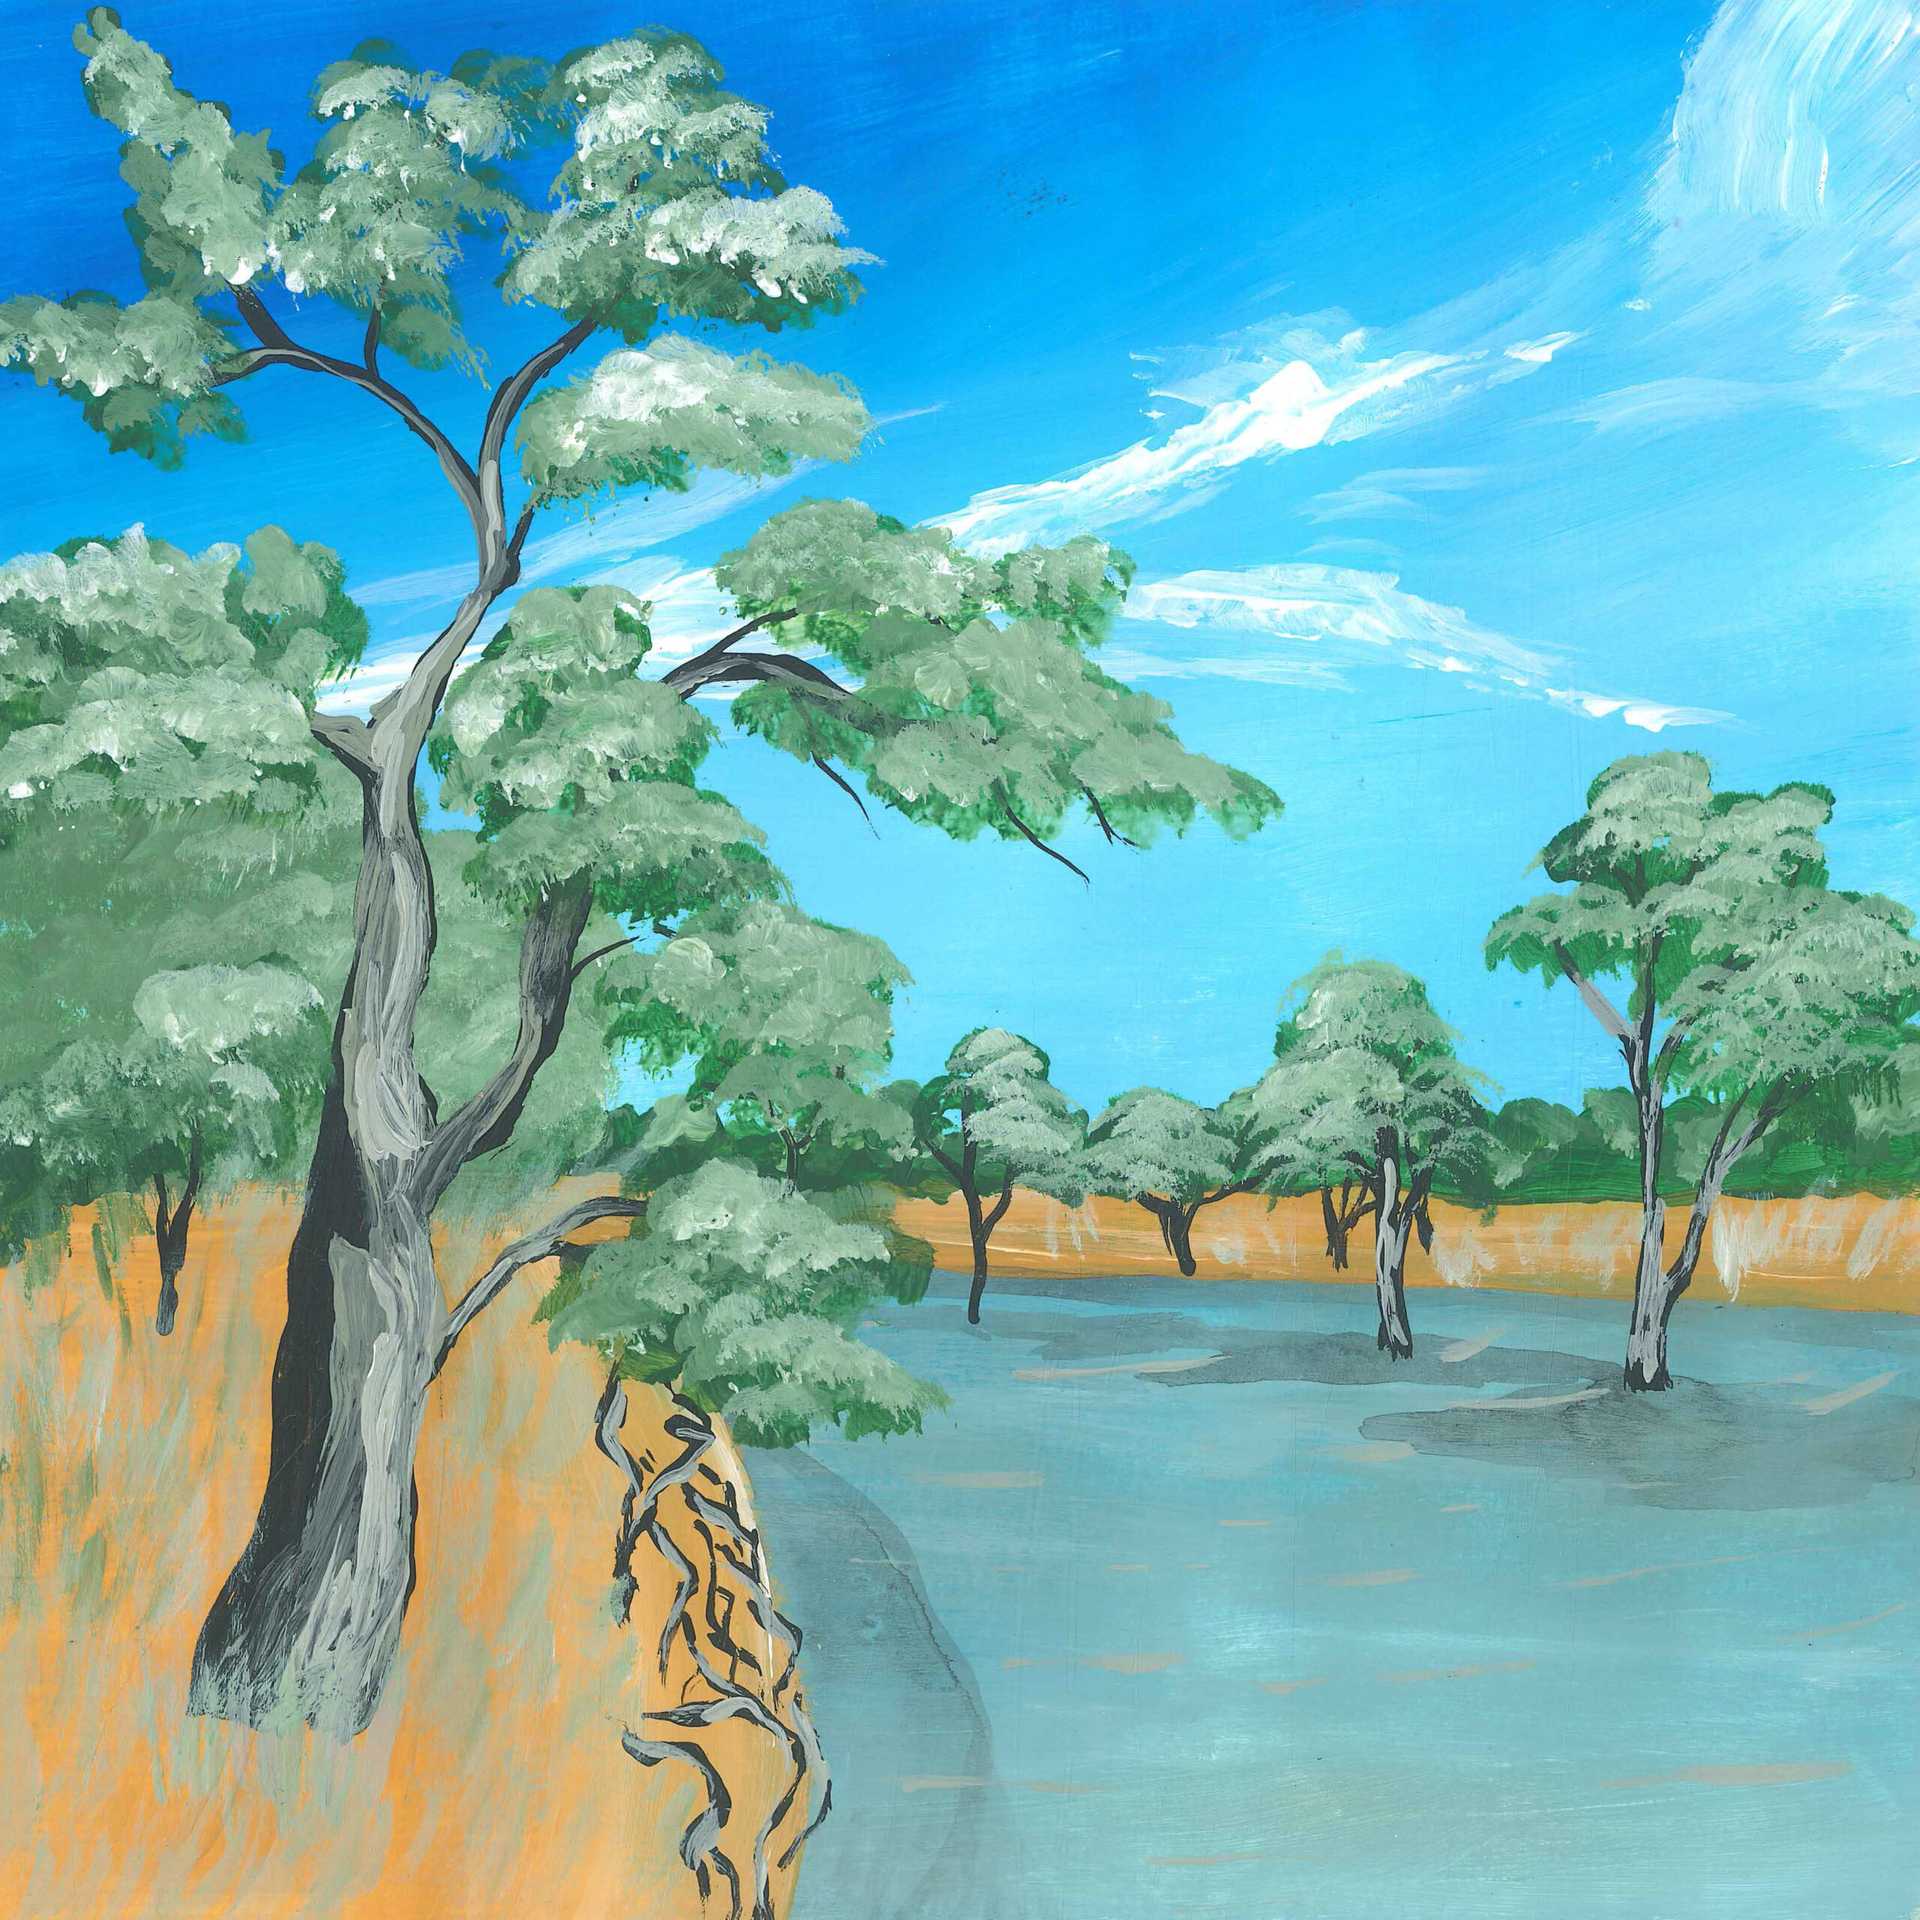 Riverine Forest in the Evening - nature landscape painting - earth.fm